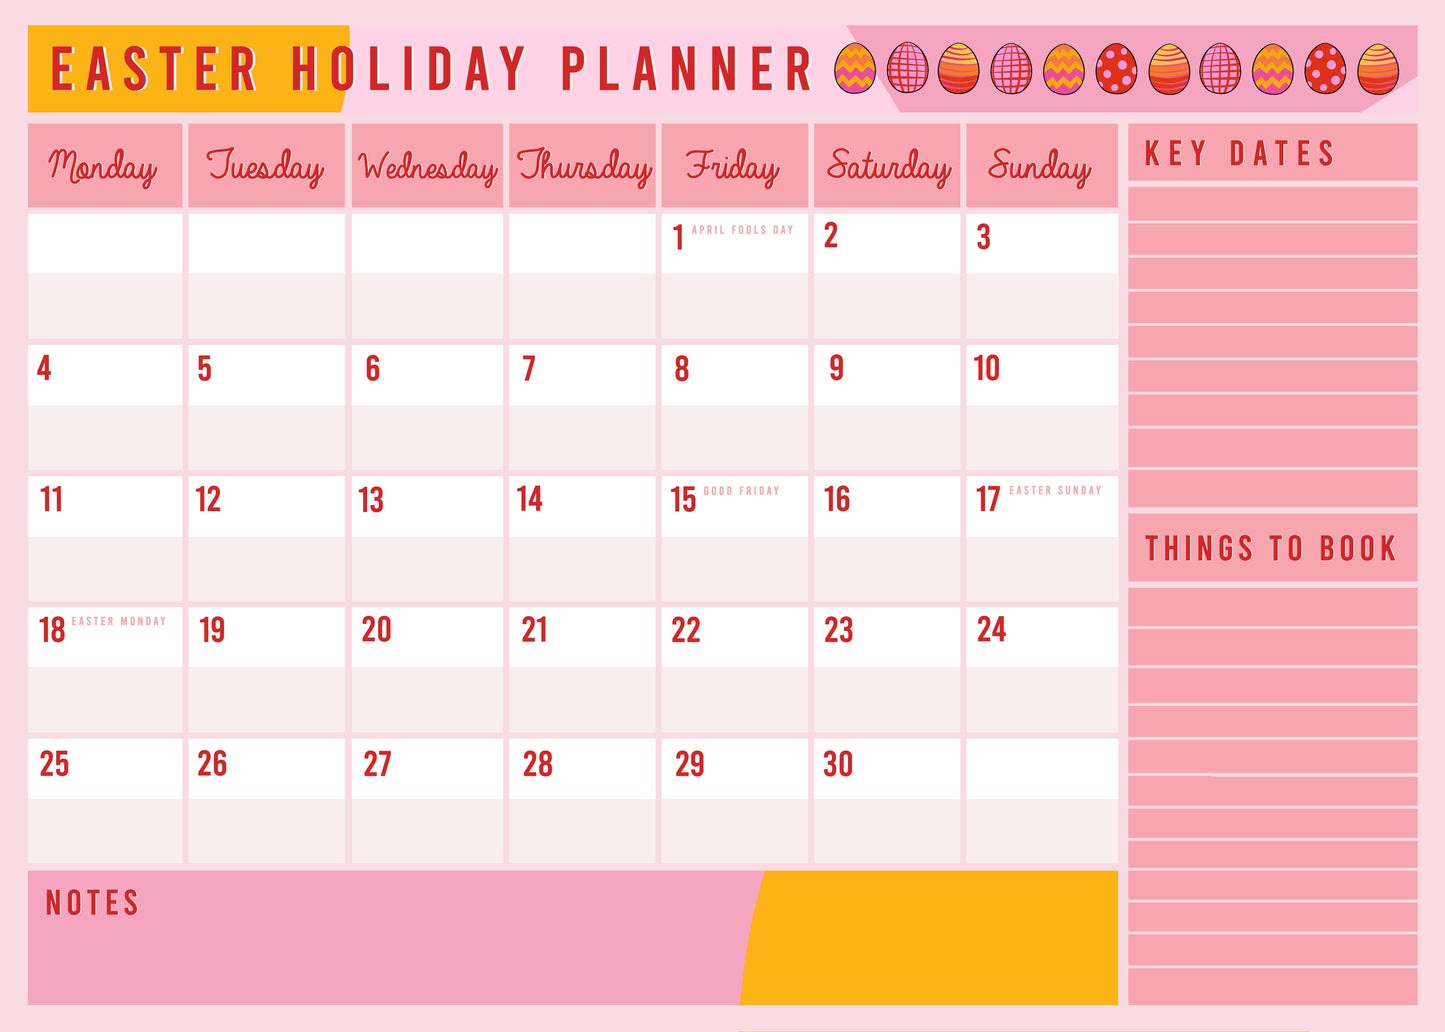 Easter Holiday Planner - Free Download